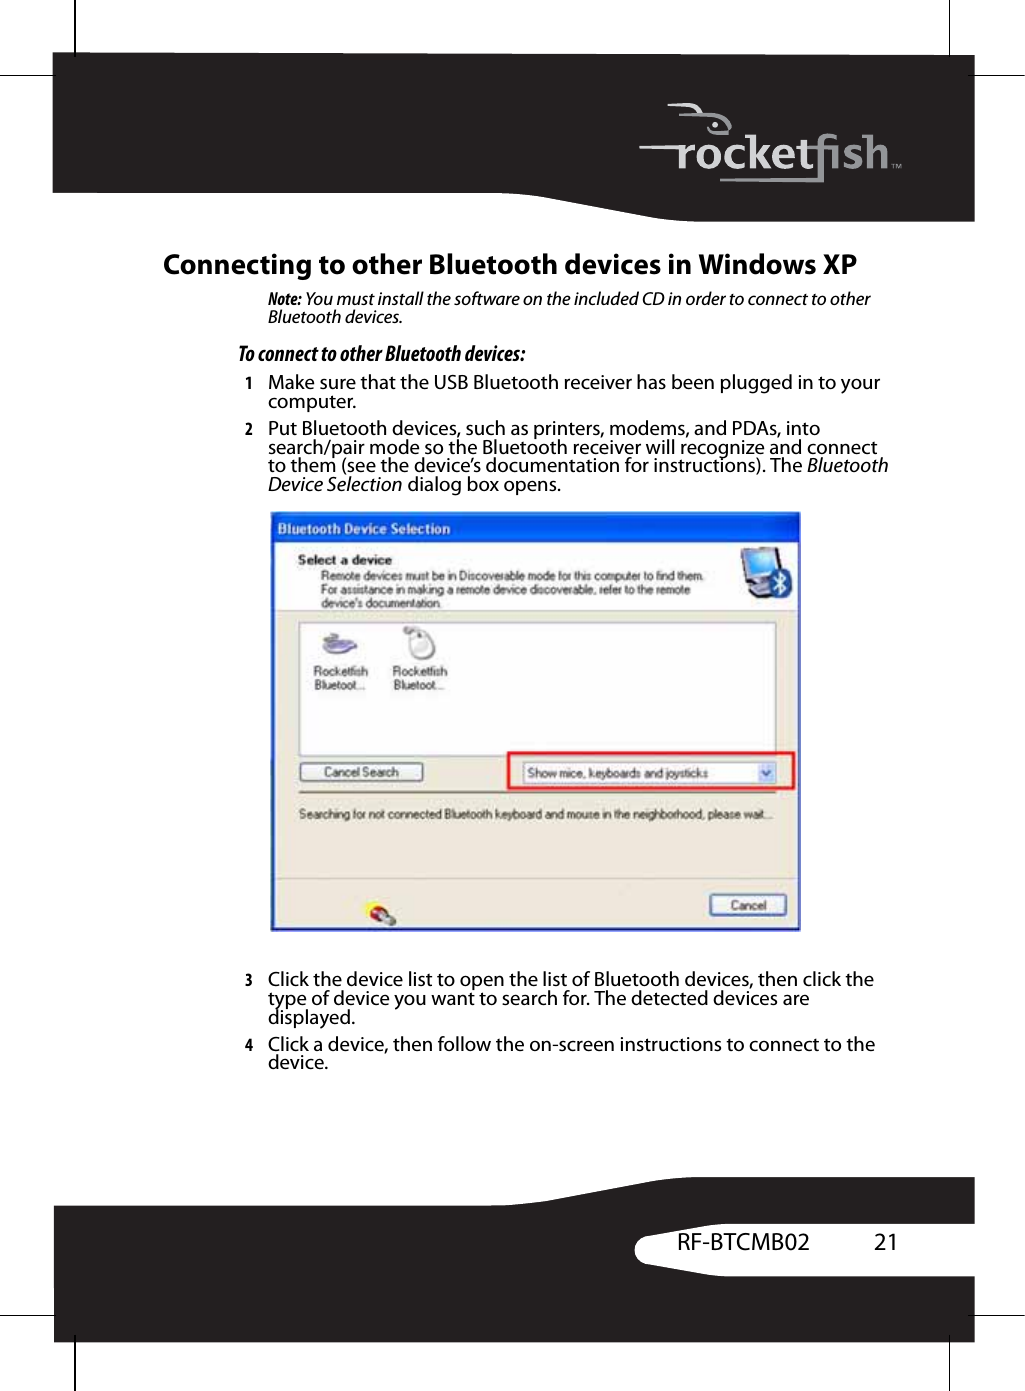 21RF-BTCMB02Connecting to other Bluetooth devices in Windows XPNote: You must install the software on the included CD in order to connect to other Bluetooth devices.To connect to other Bluetooth devices:1Make sure that the USB Bluetooth receiver has been plugged in to your computer.2Put Bluetooth devices, such as printers, modems, and PDAs, into search/pair mode so the Bluetooth receiver will recognize and connect to them (see the device’s documentation for instructions). The Bluetooth Device Selection dialog box opens.3Click the device list to open the list of Bluetooth devices, then click the type of device you want to search for. The detected devices are displayed.4Click a device, then follow the on-screen instructions to connect to the device.